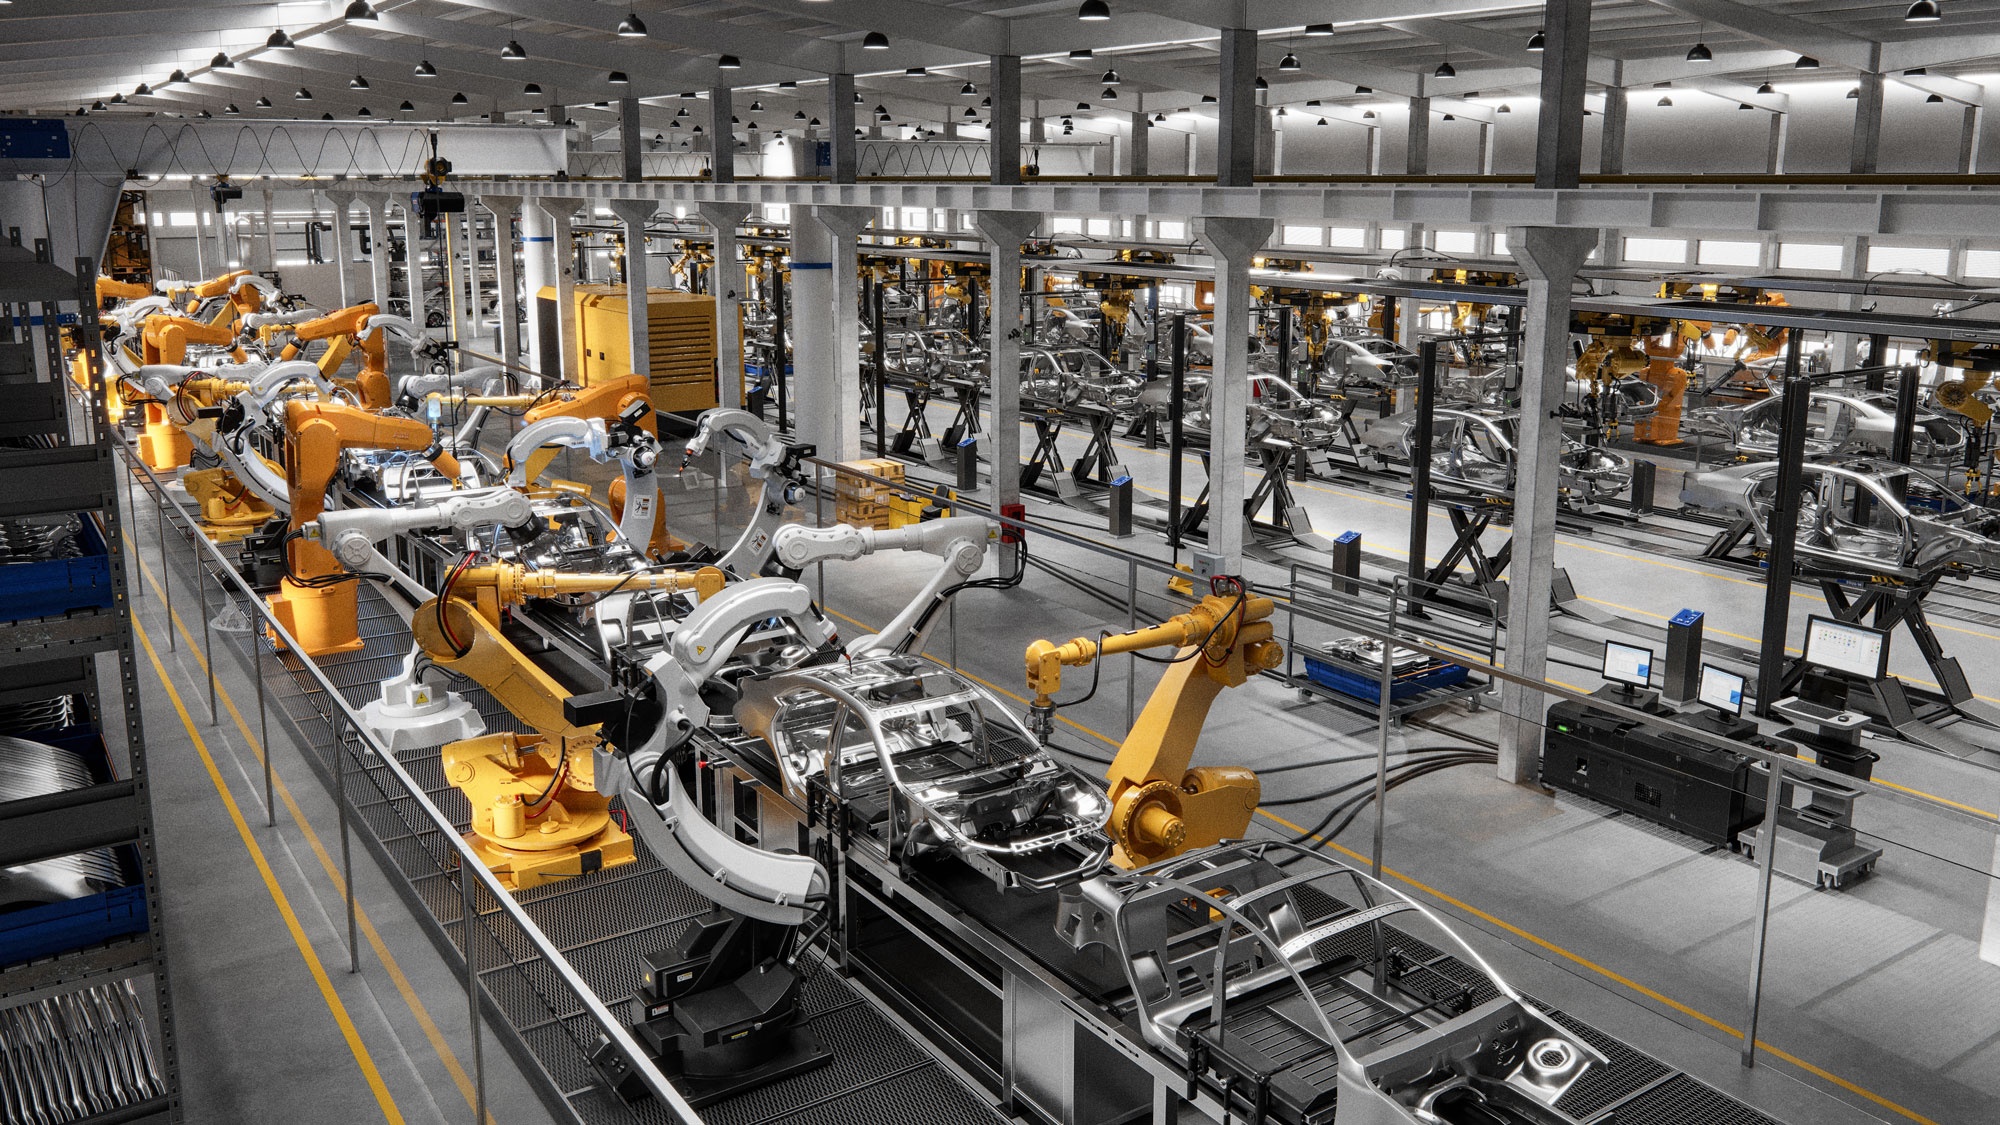 3 ways a virtual factory tour can benefit your business